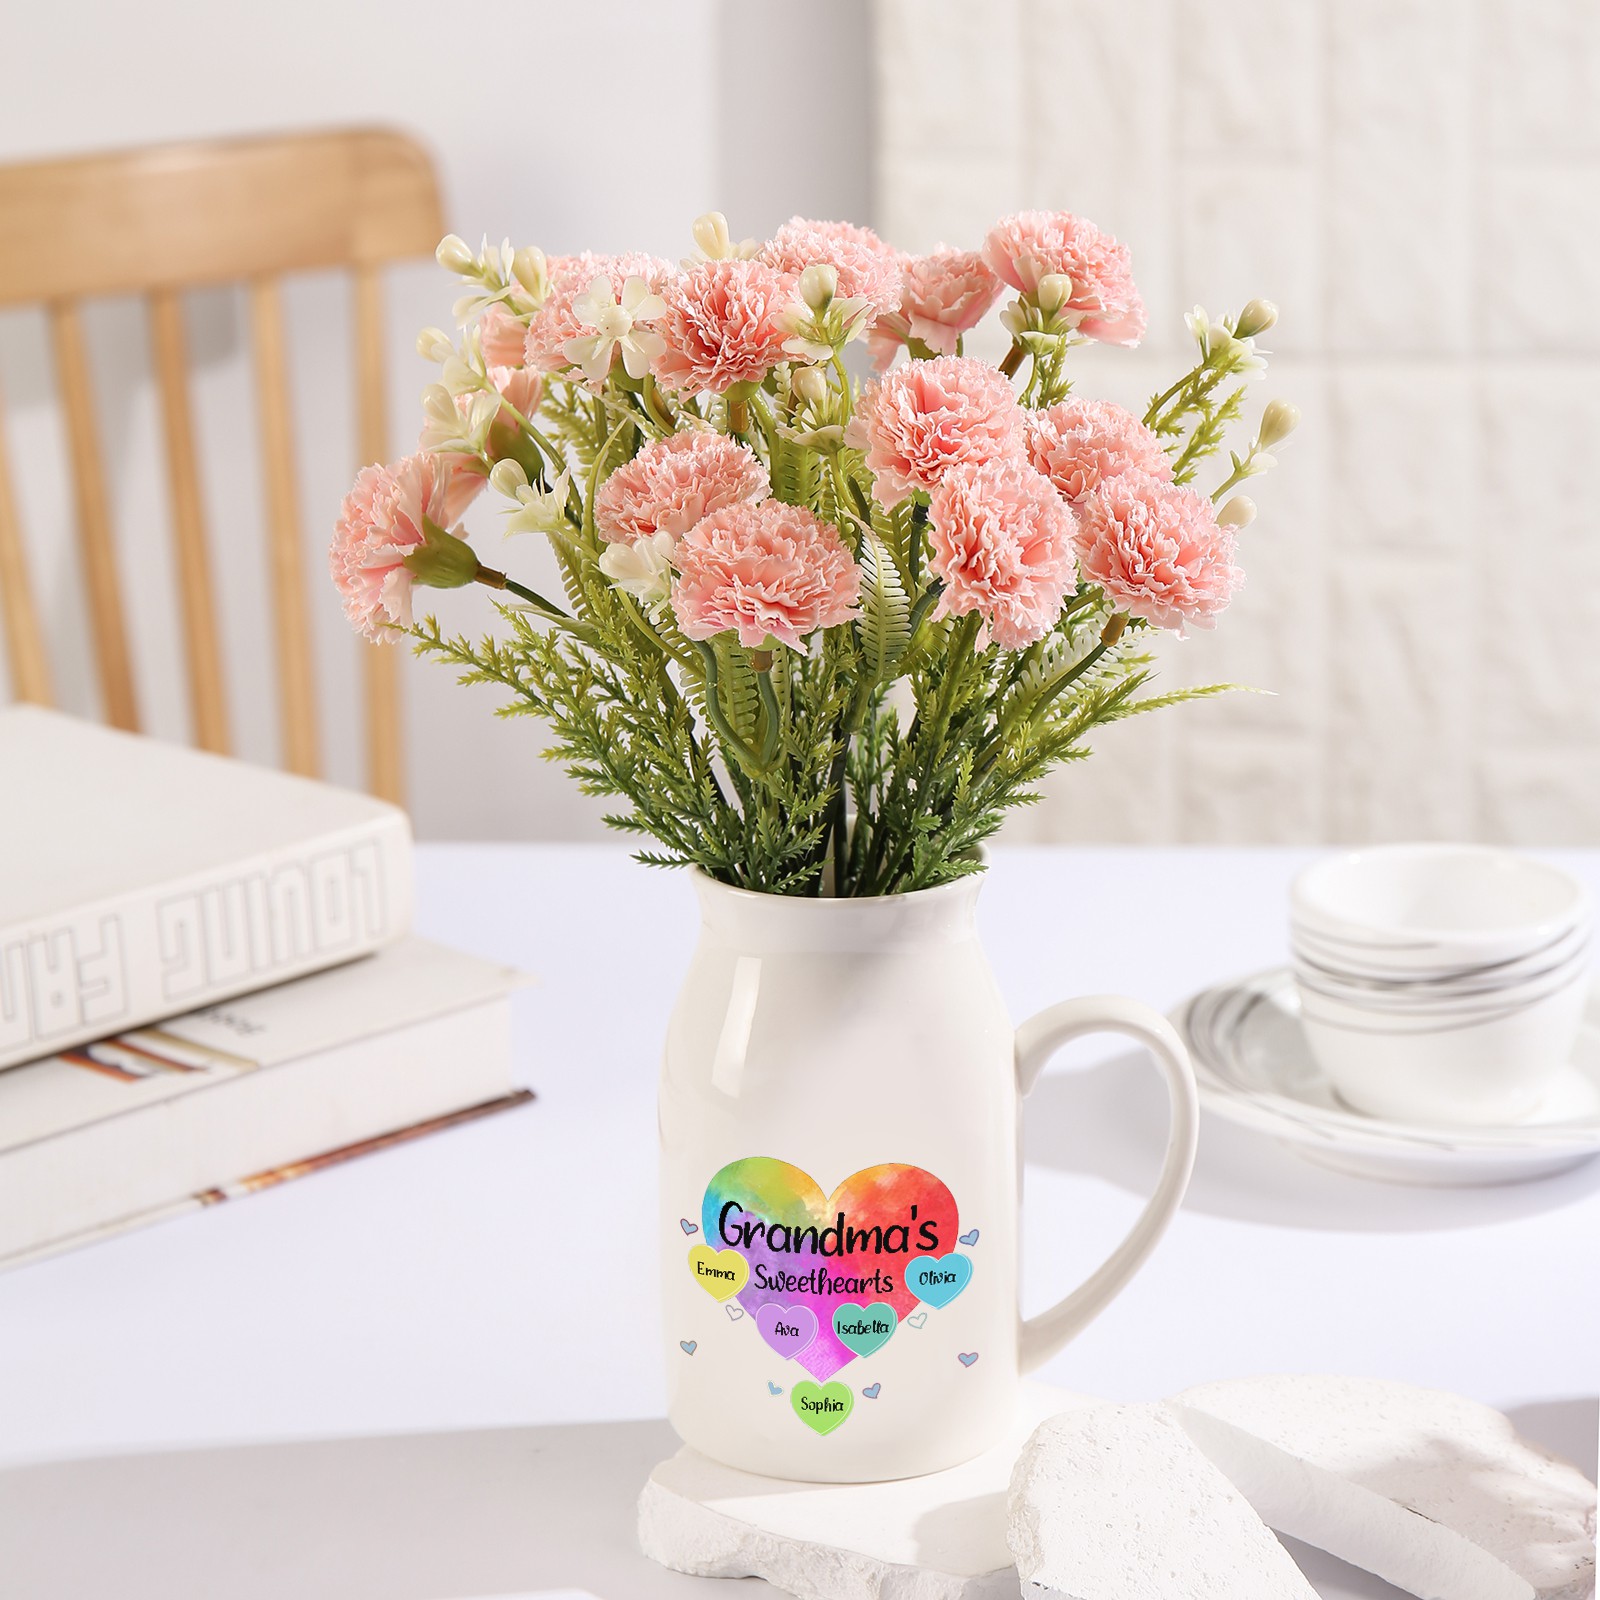 5 Names - Personalized Customizable Name Colorful Love Heart Style Ceramic Vase as a Gift for Grandma